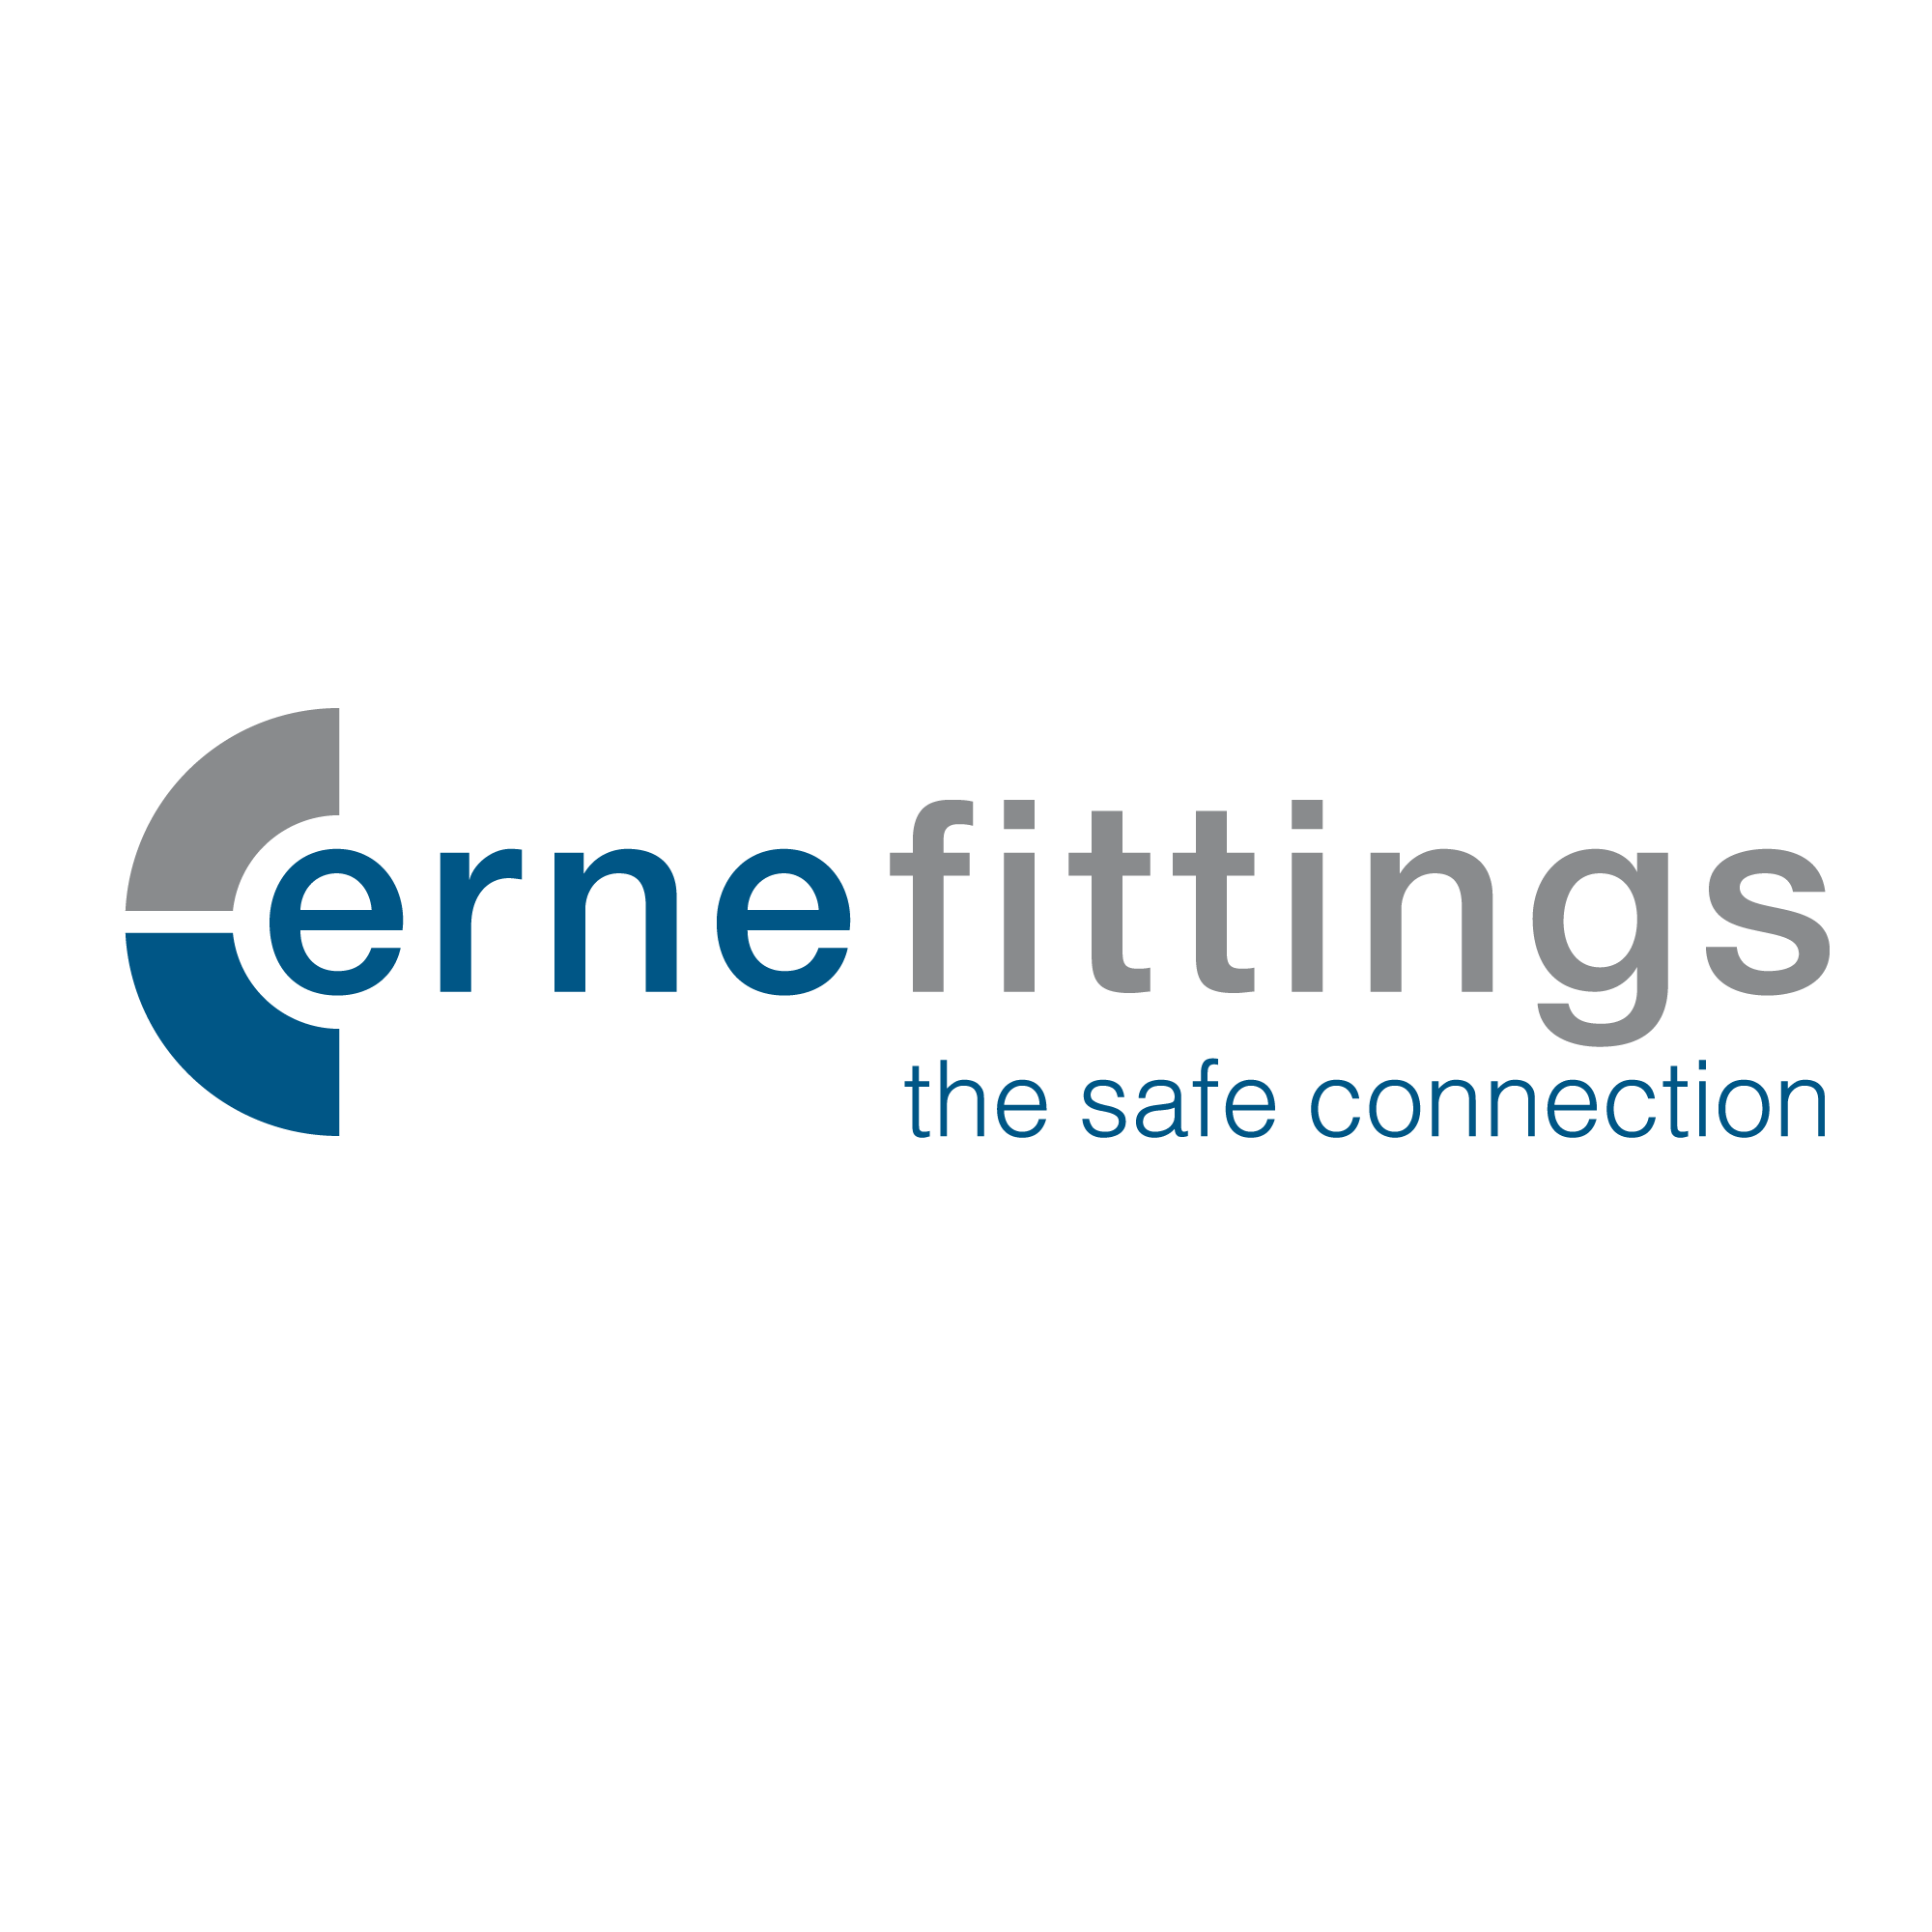 Erne Fittings - The world's leading supplier of butt-weld fittings in the approved market - Erne Fittings